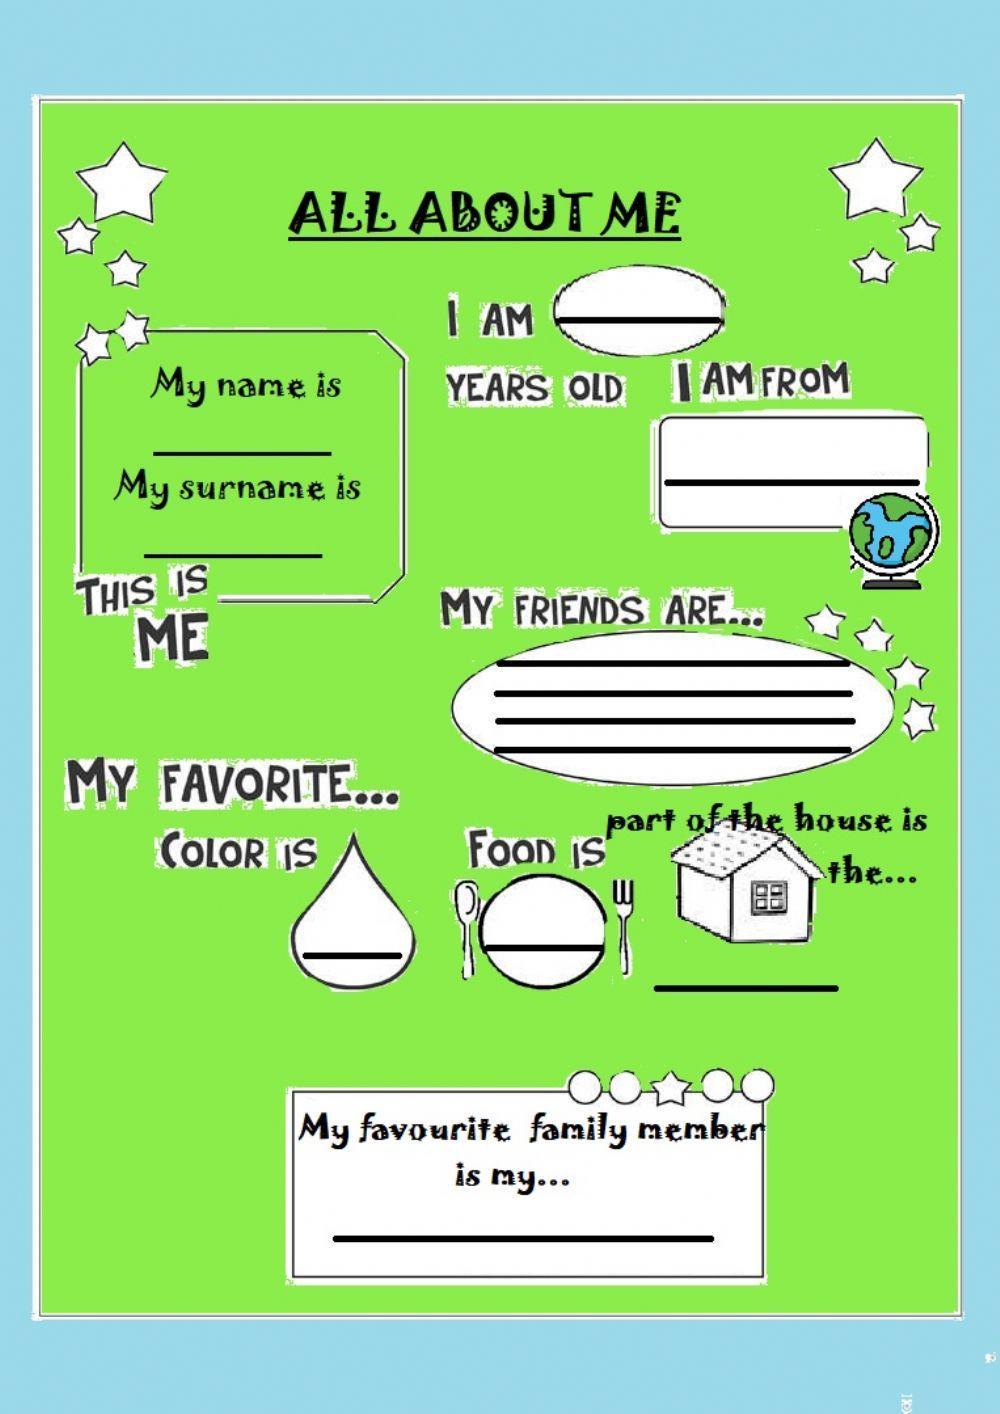 All about me-personal information